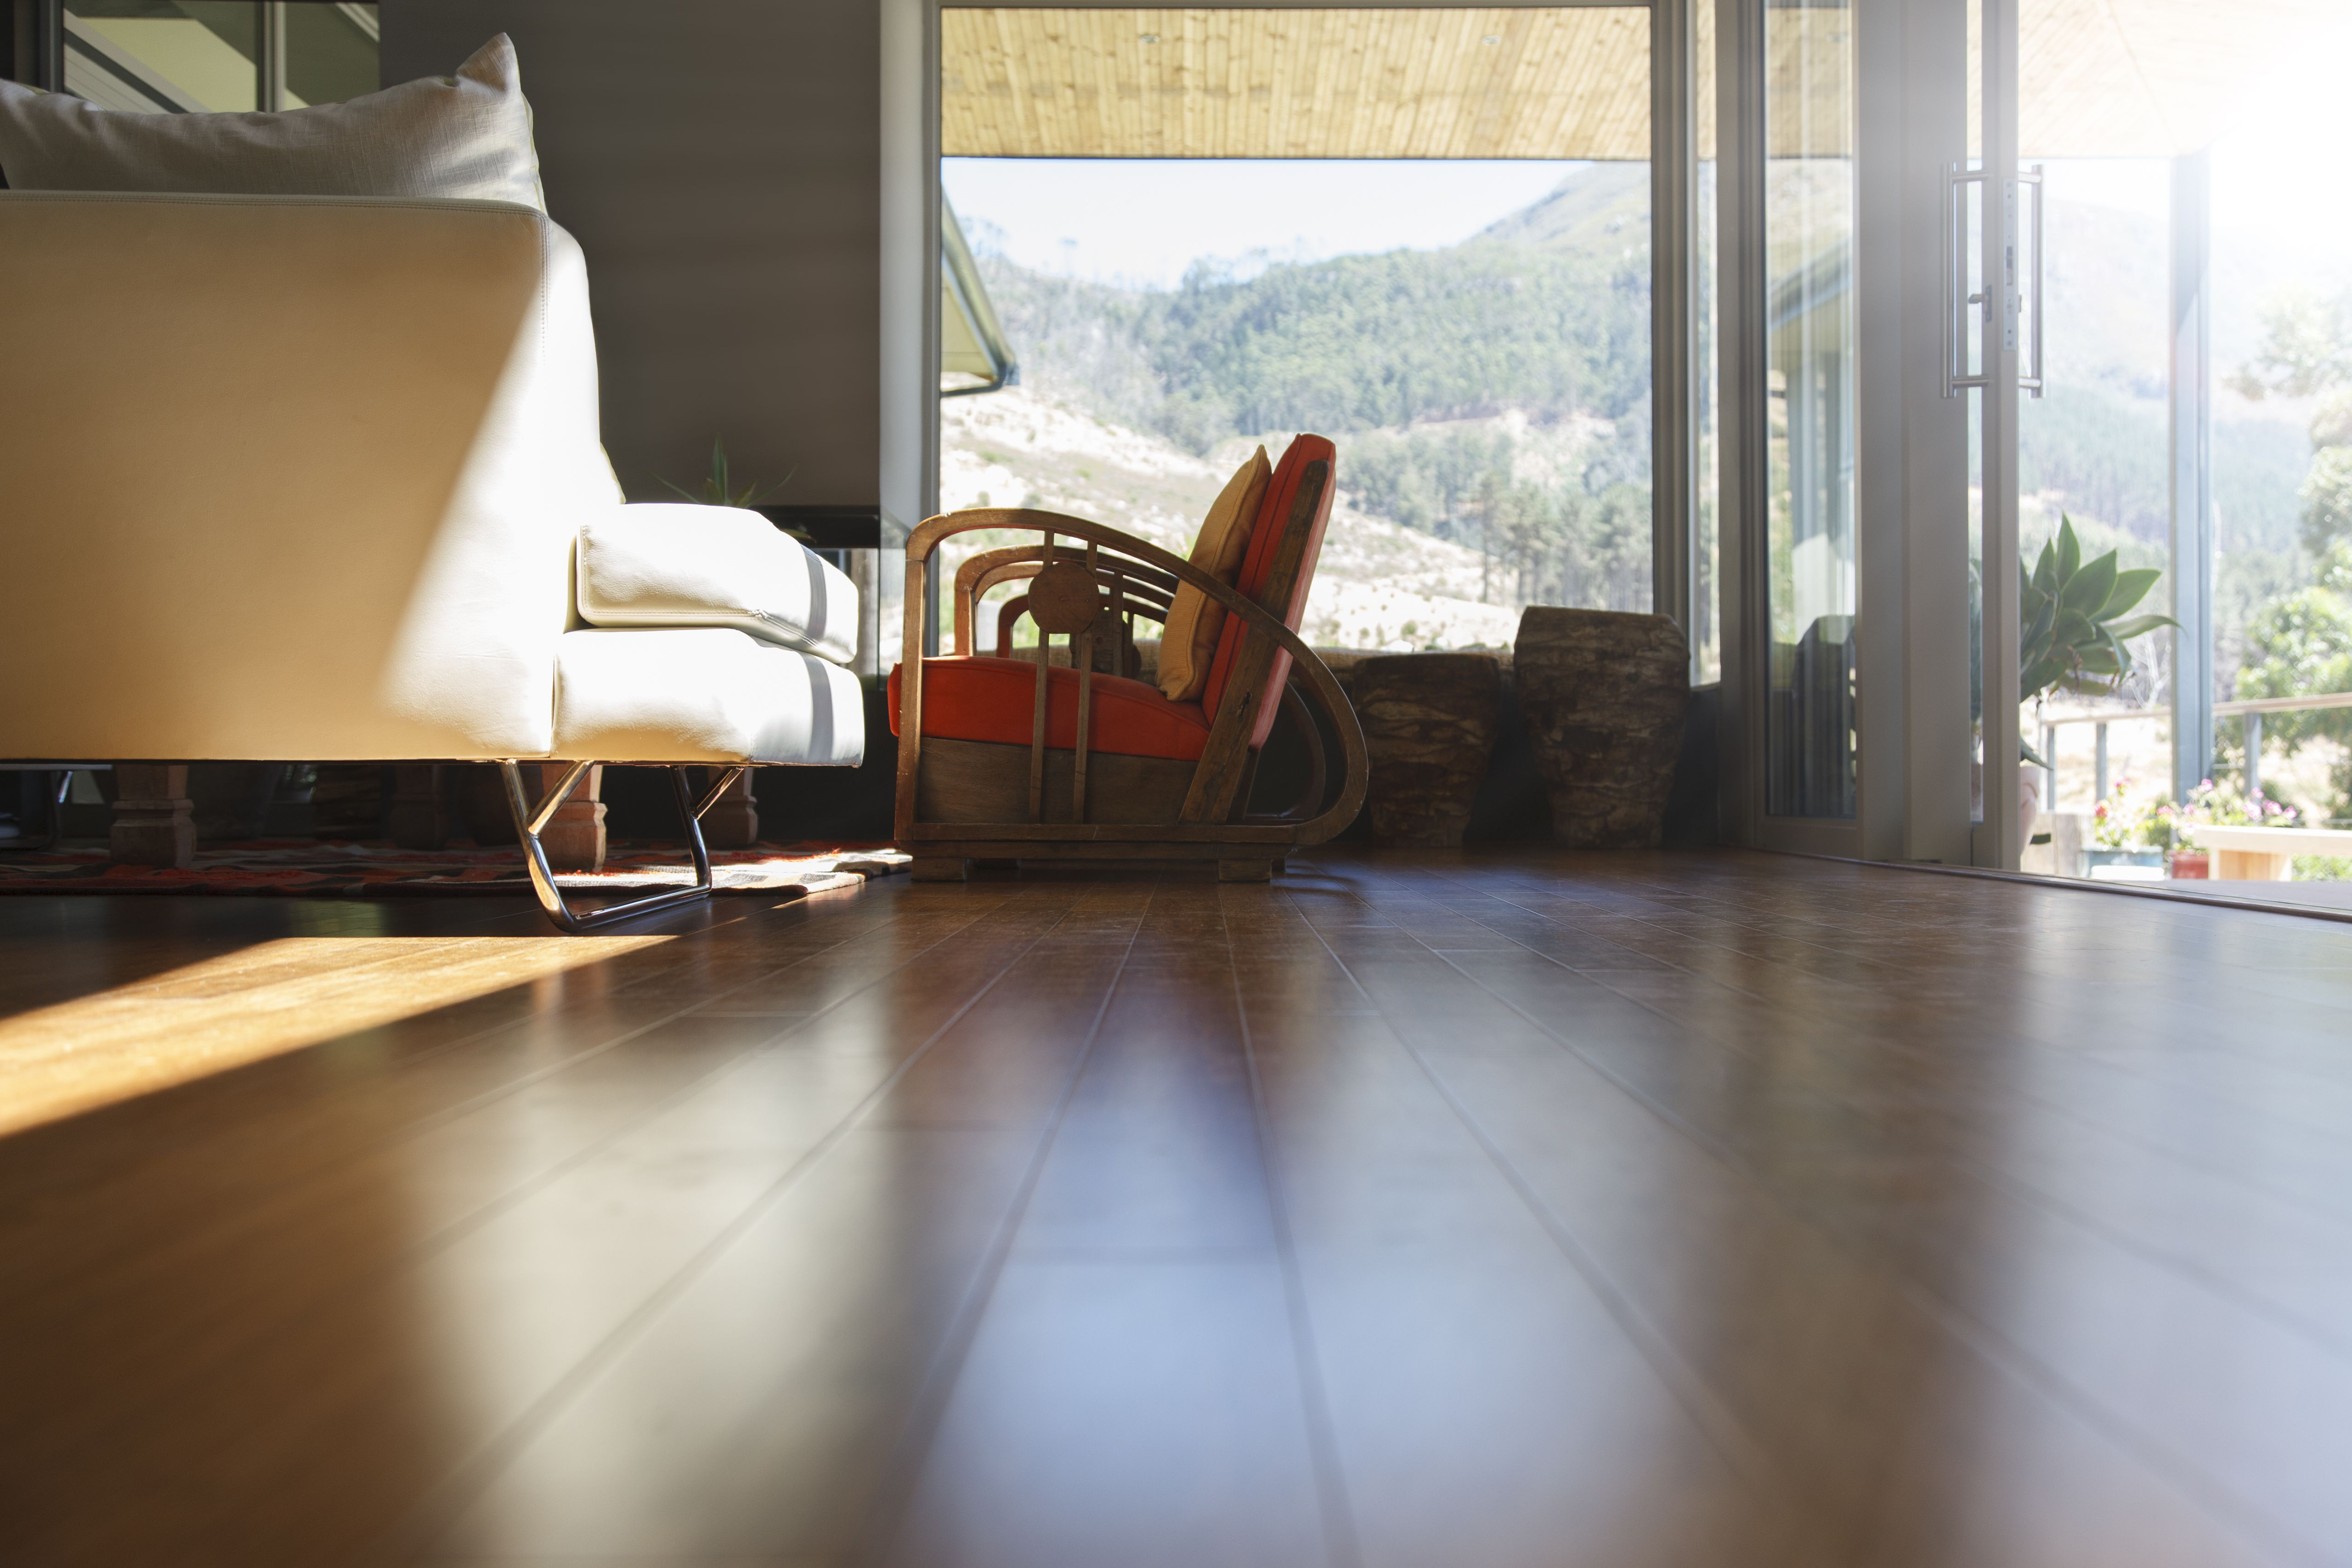 23 Awesome Price to Install Hardwood Floors Home Depot 2024 free download price to install hardwood floors home depot of a vinyl plank flooring guide pertaining to living room interior hard wood floor and sofa 525439899 57e95e215f9b586c359d5ab1